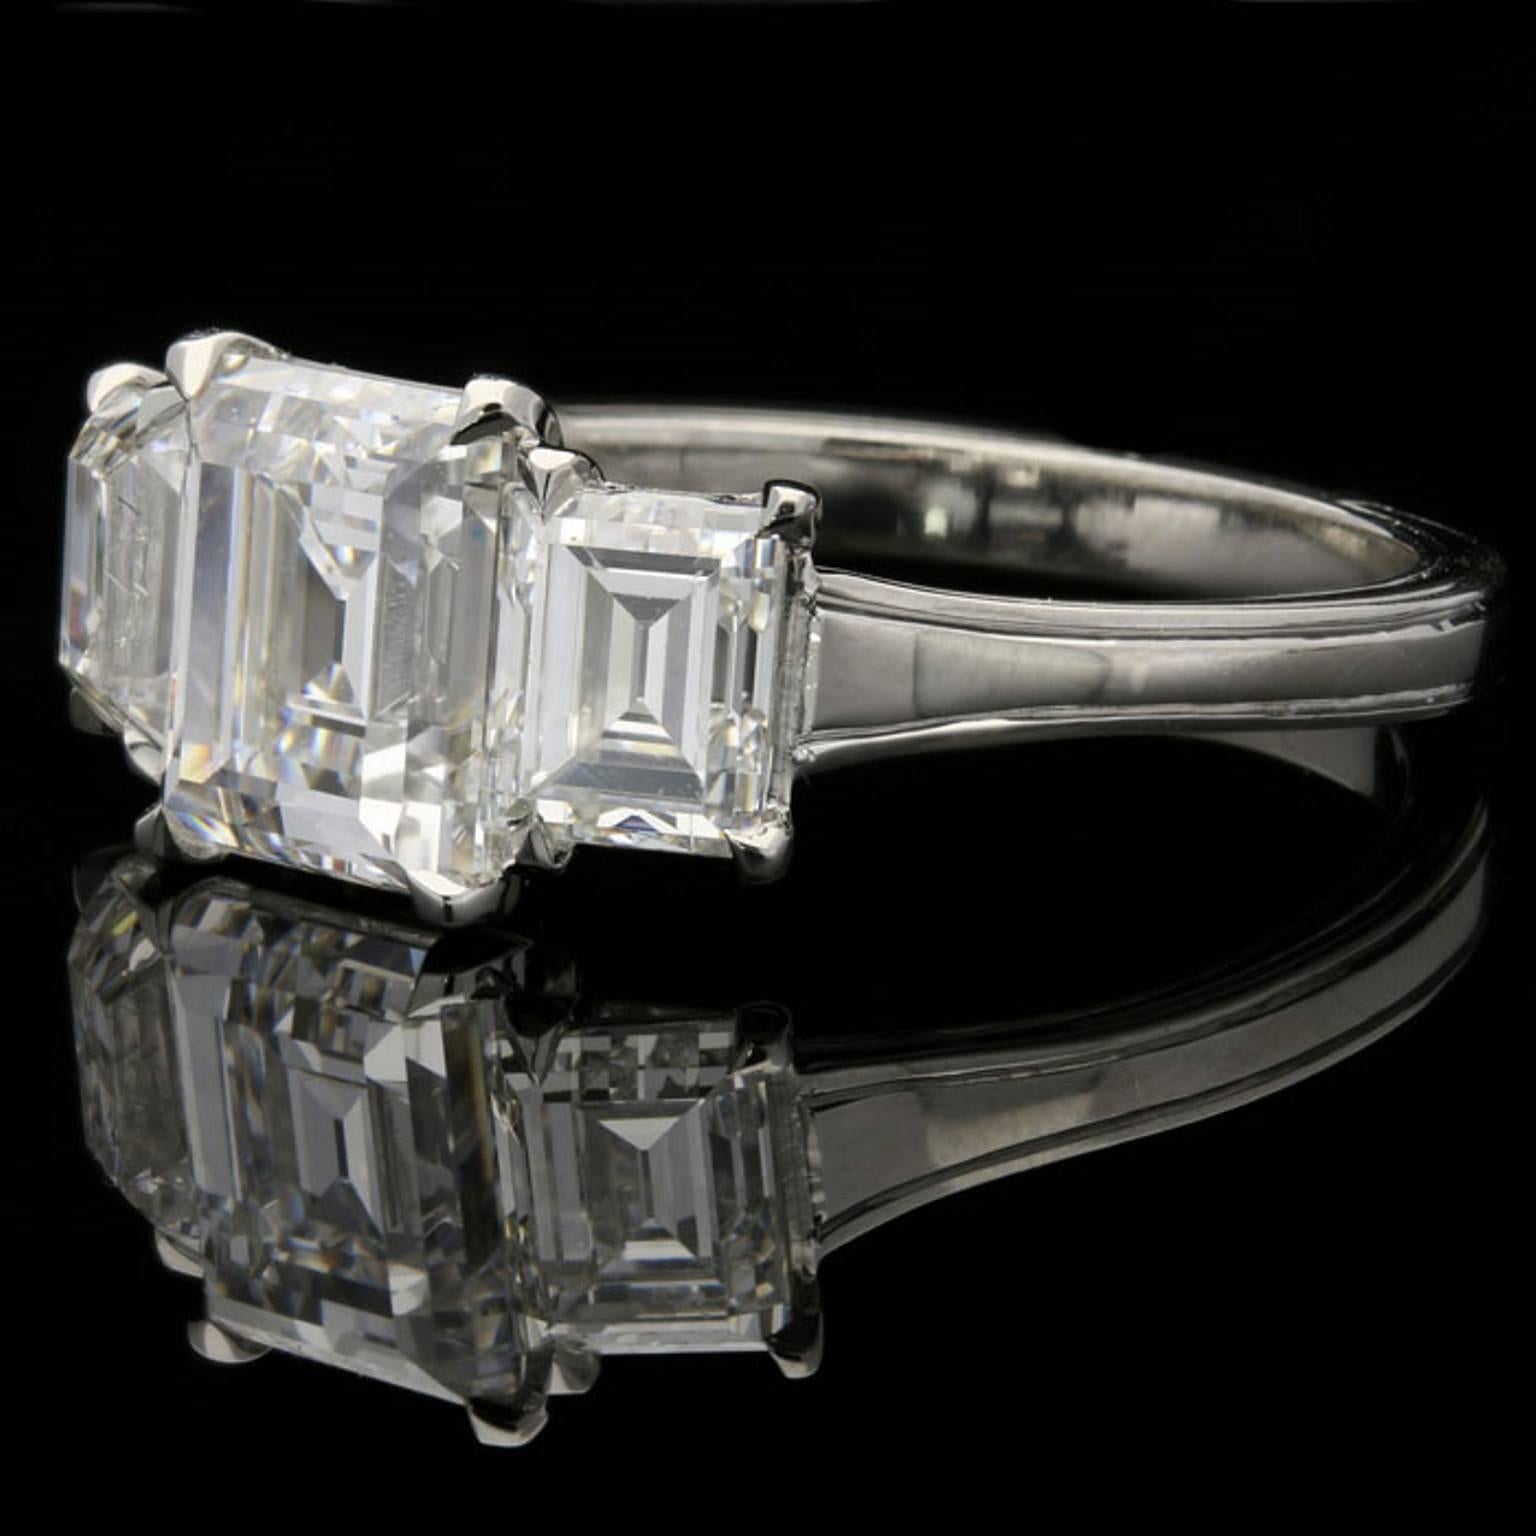 The ring set with three beautifully cut and matched old rectangular step-cut diamonds, the centre stone is 2.13cts and F colour VS1 clarity and is flanked by a 0.76ct F colour VVS2 clarity and a 0.74ct E colour VS2 clarity, all three are corner set